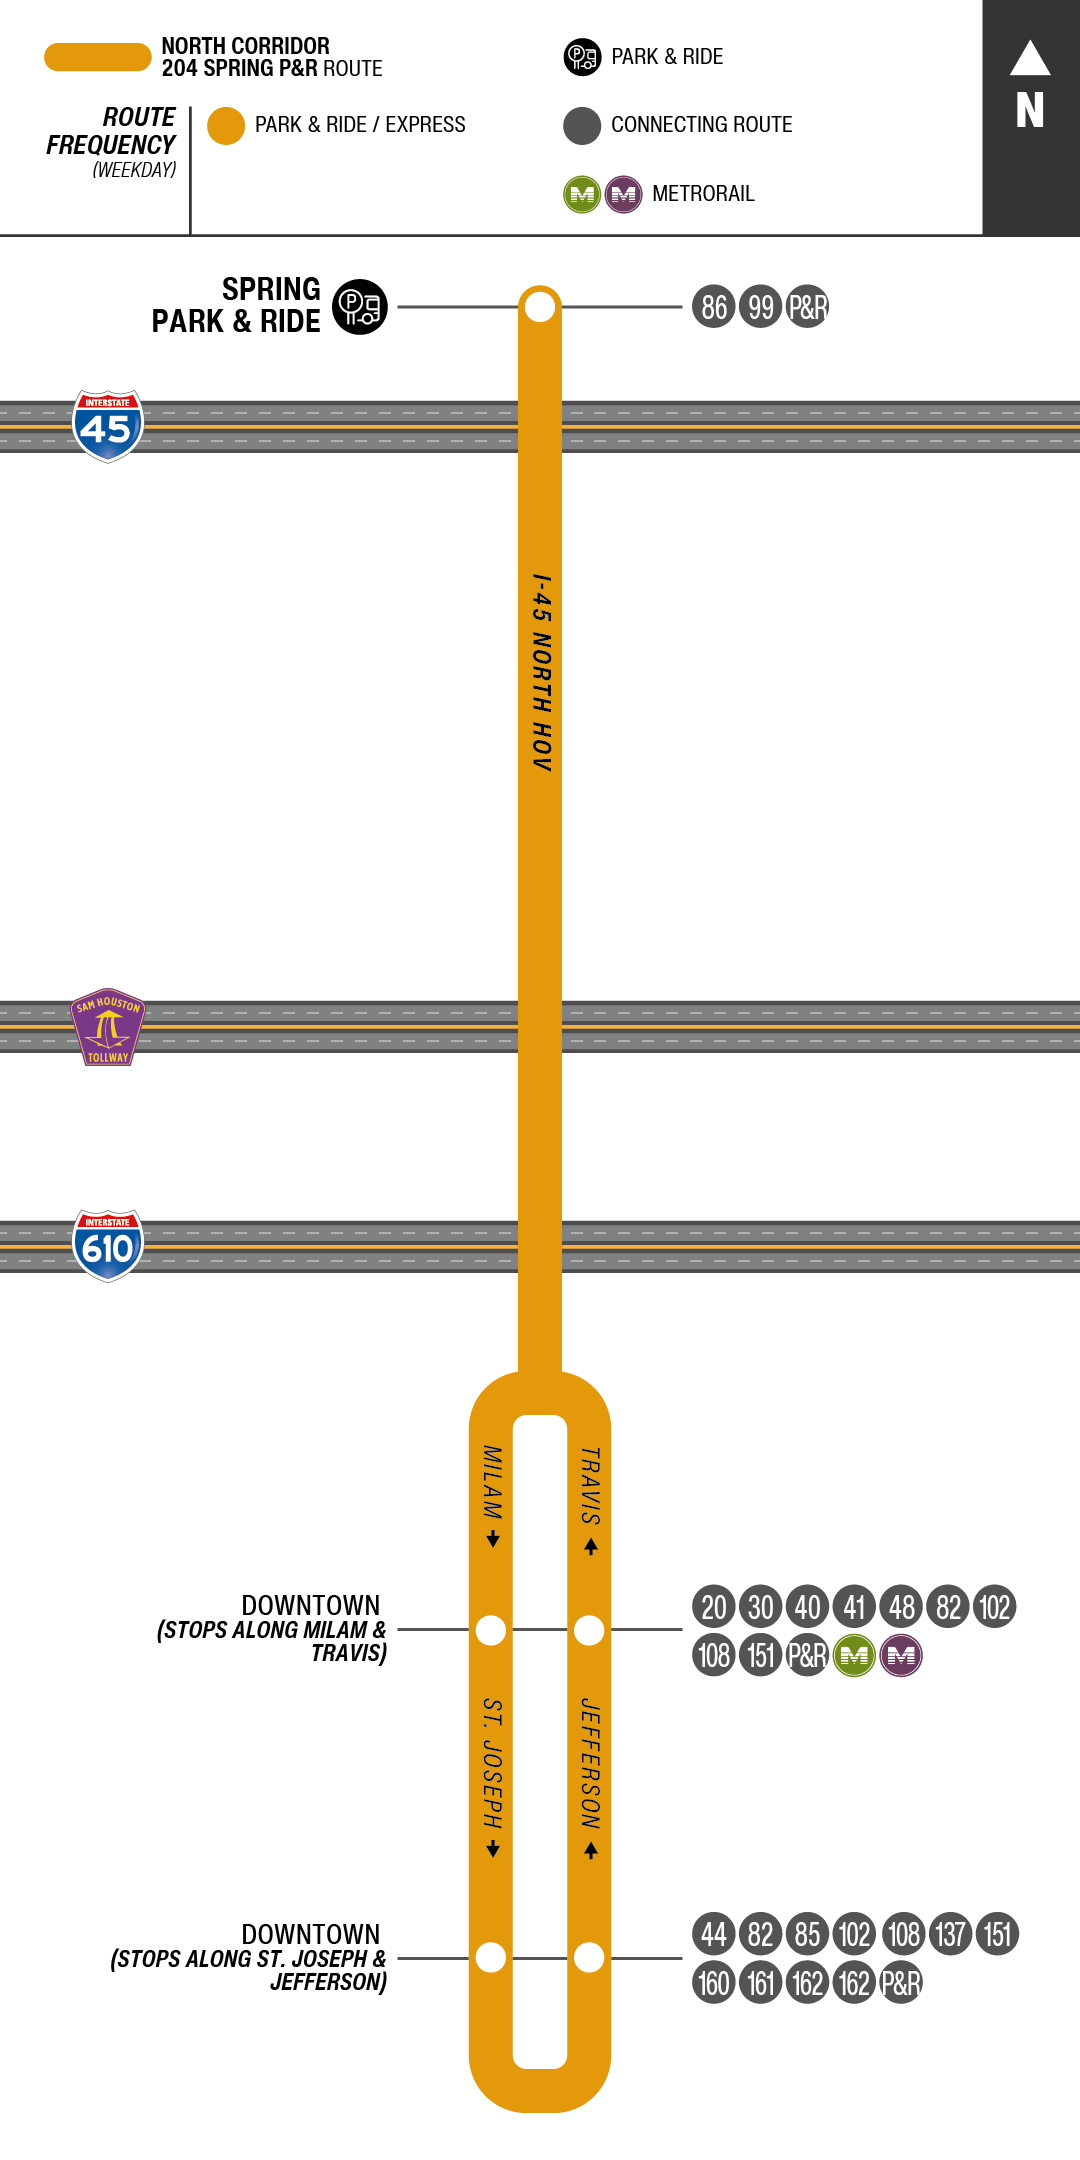 Route map for 204 Spring Park & Ride bus